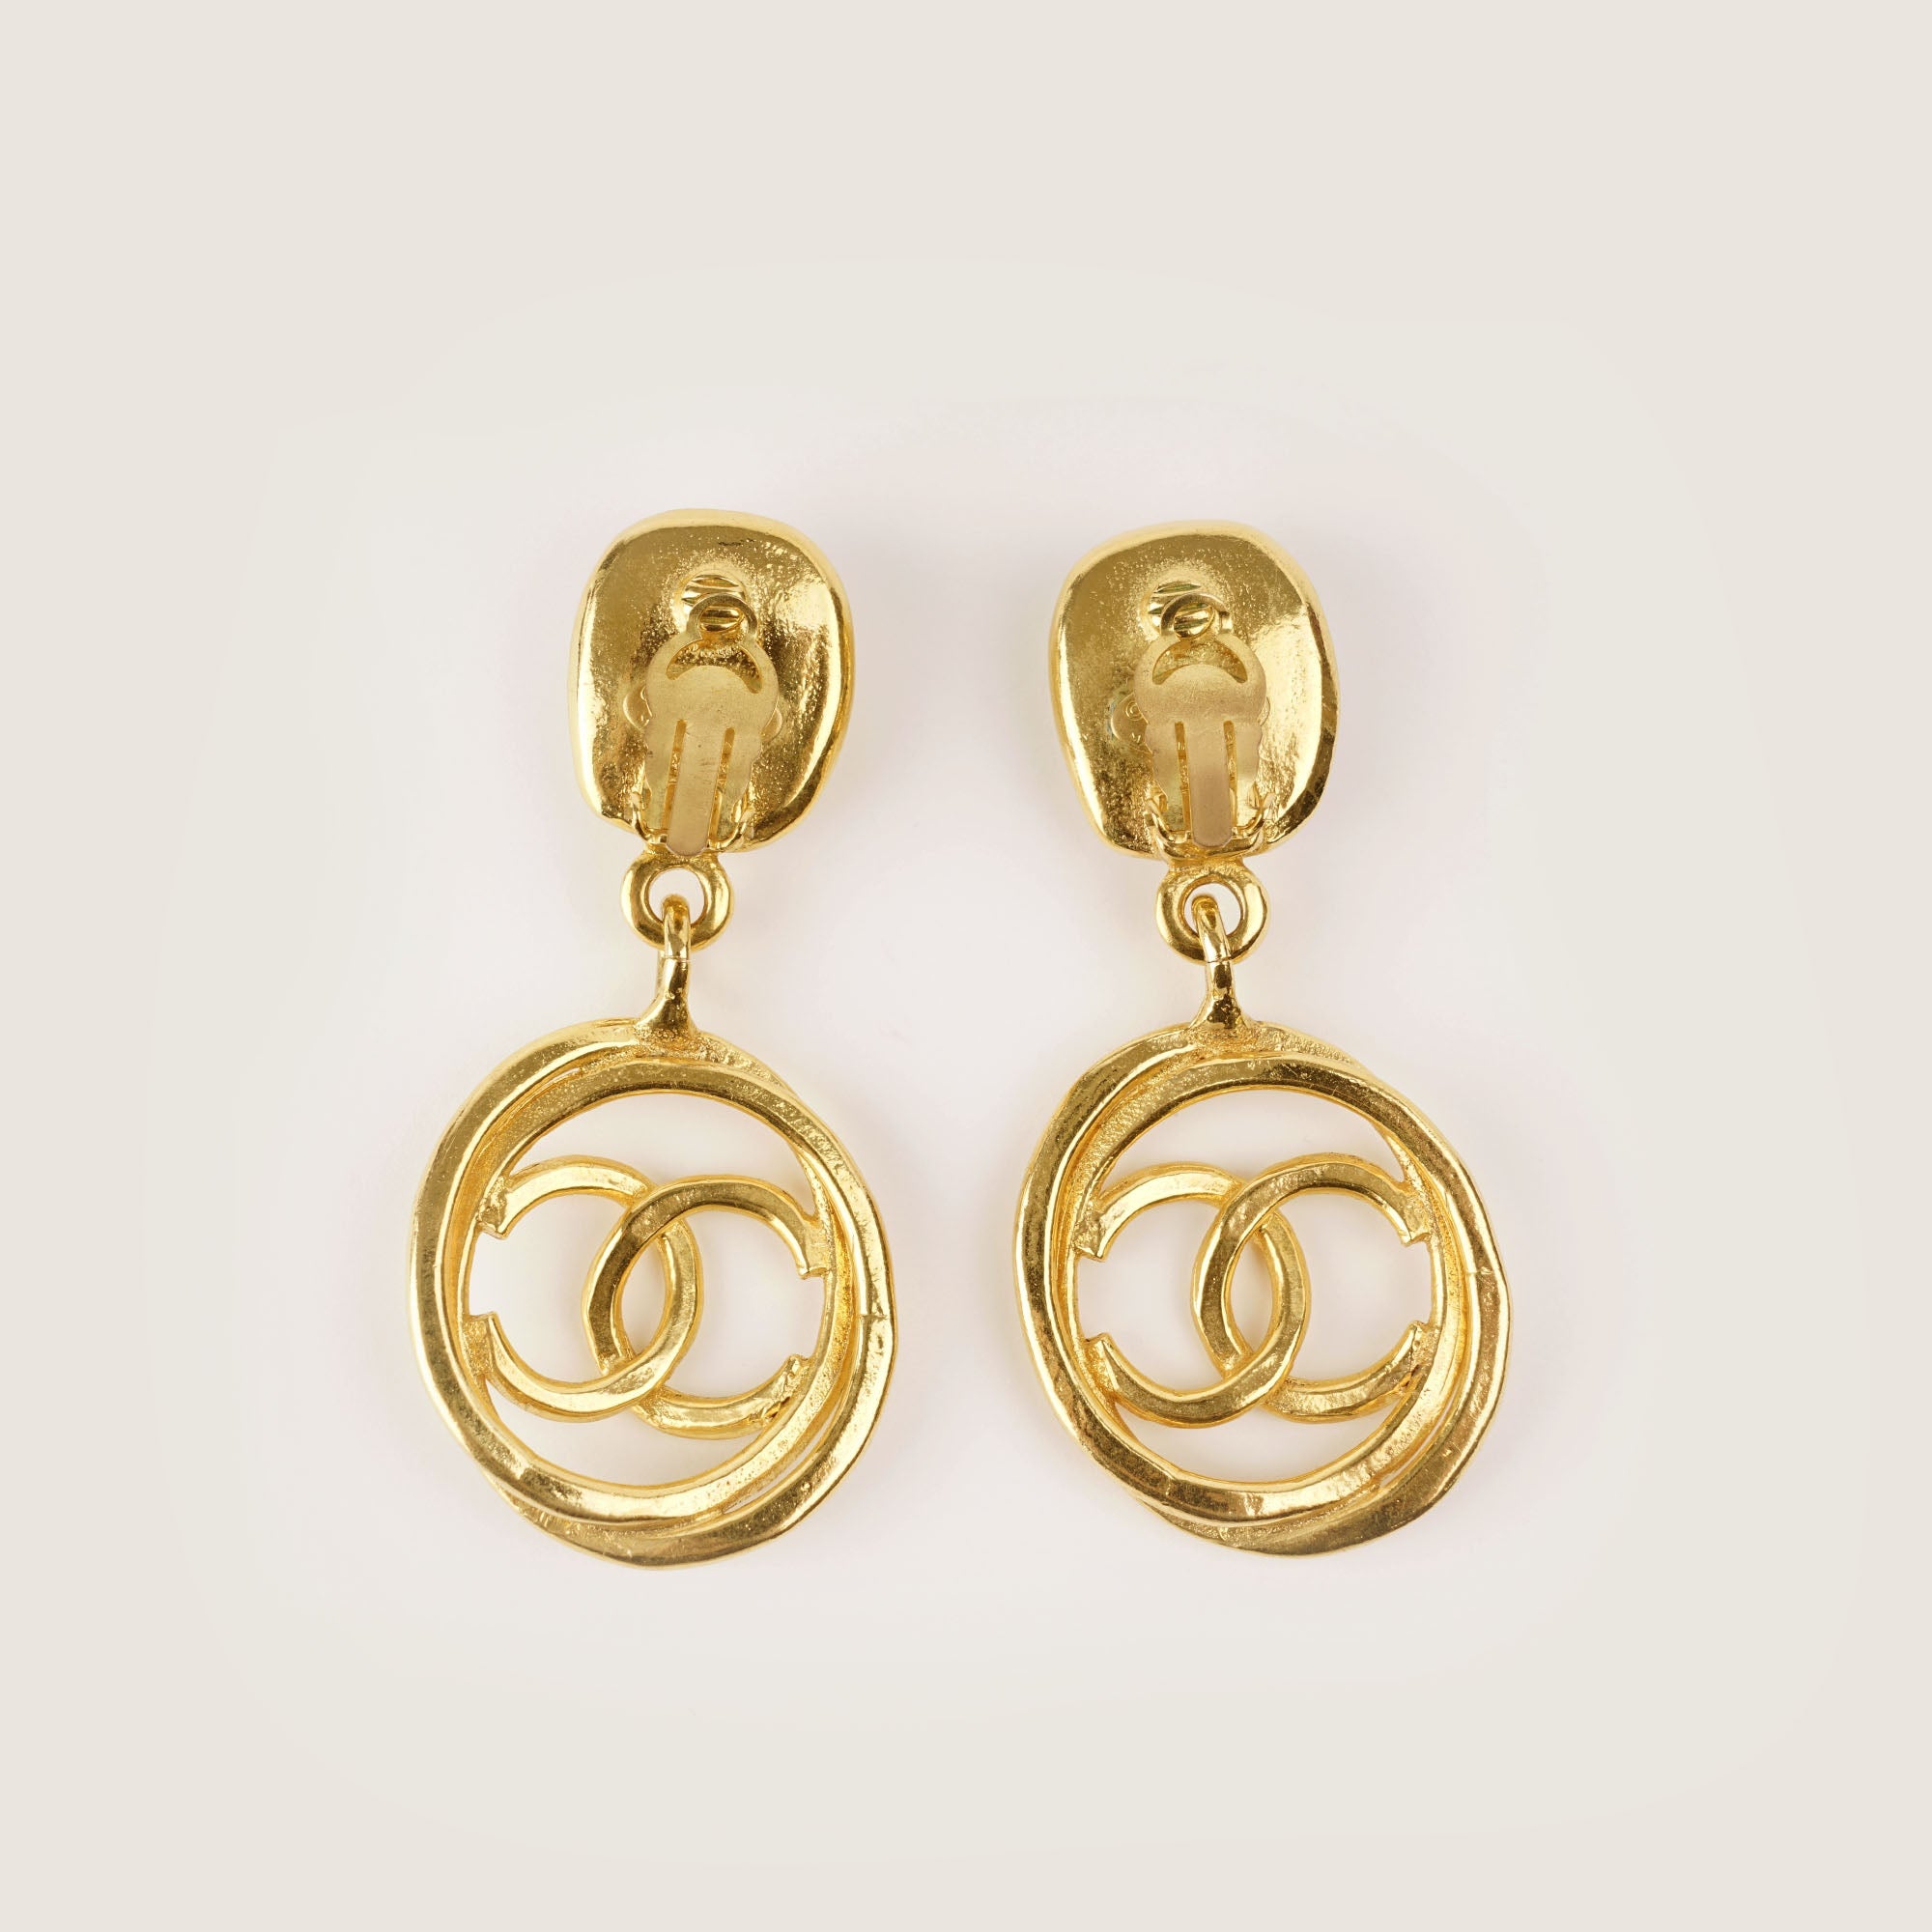 Vintage Oversized CC Earrings - CHANEL - Affordable Luxury image